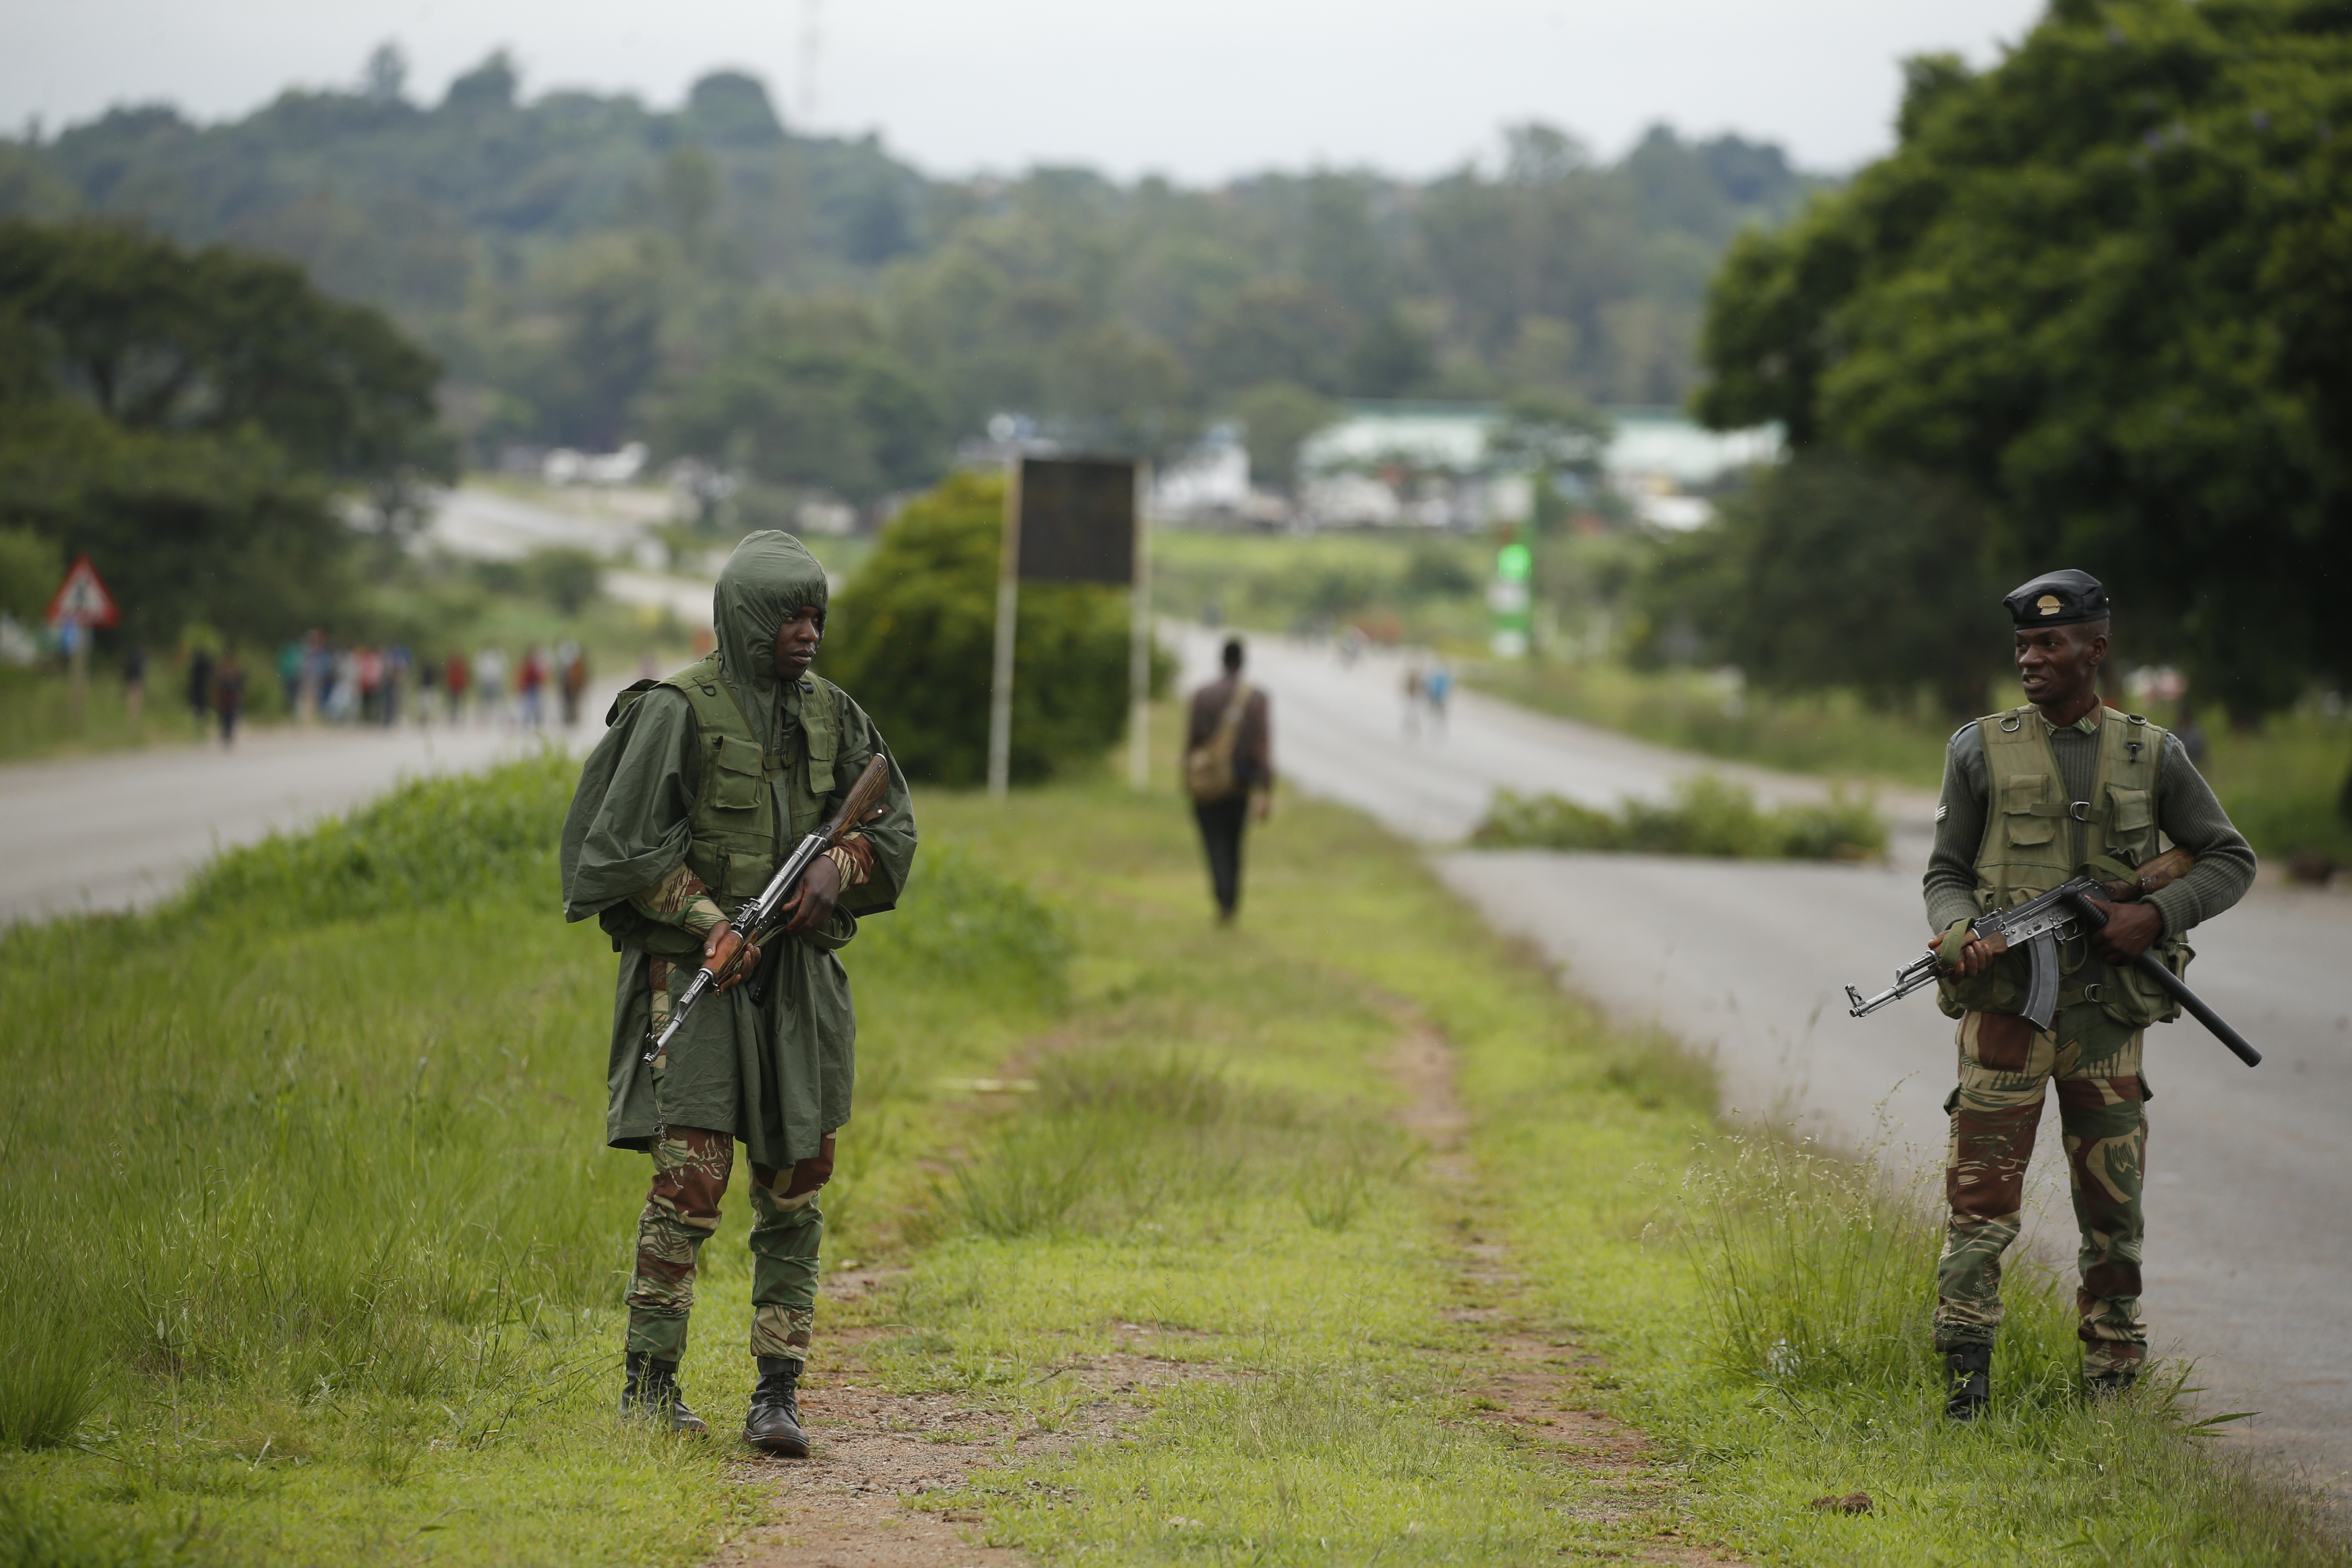 A letter from Zimbabwe where the military crackdown is devastating